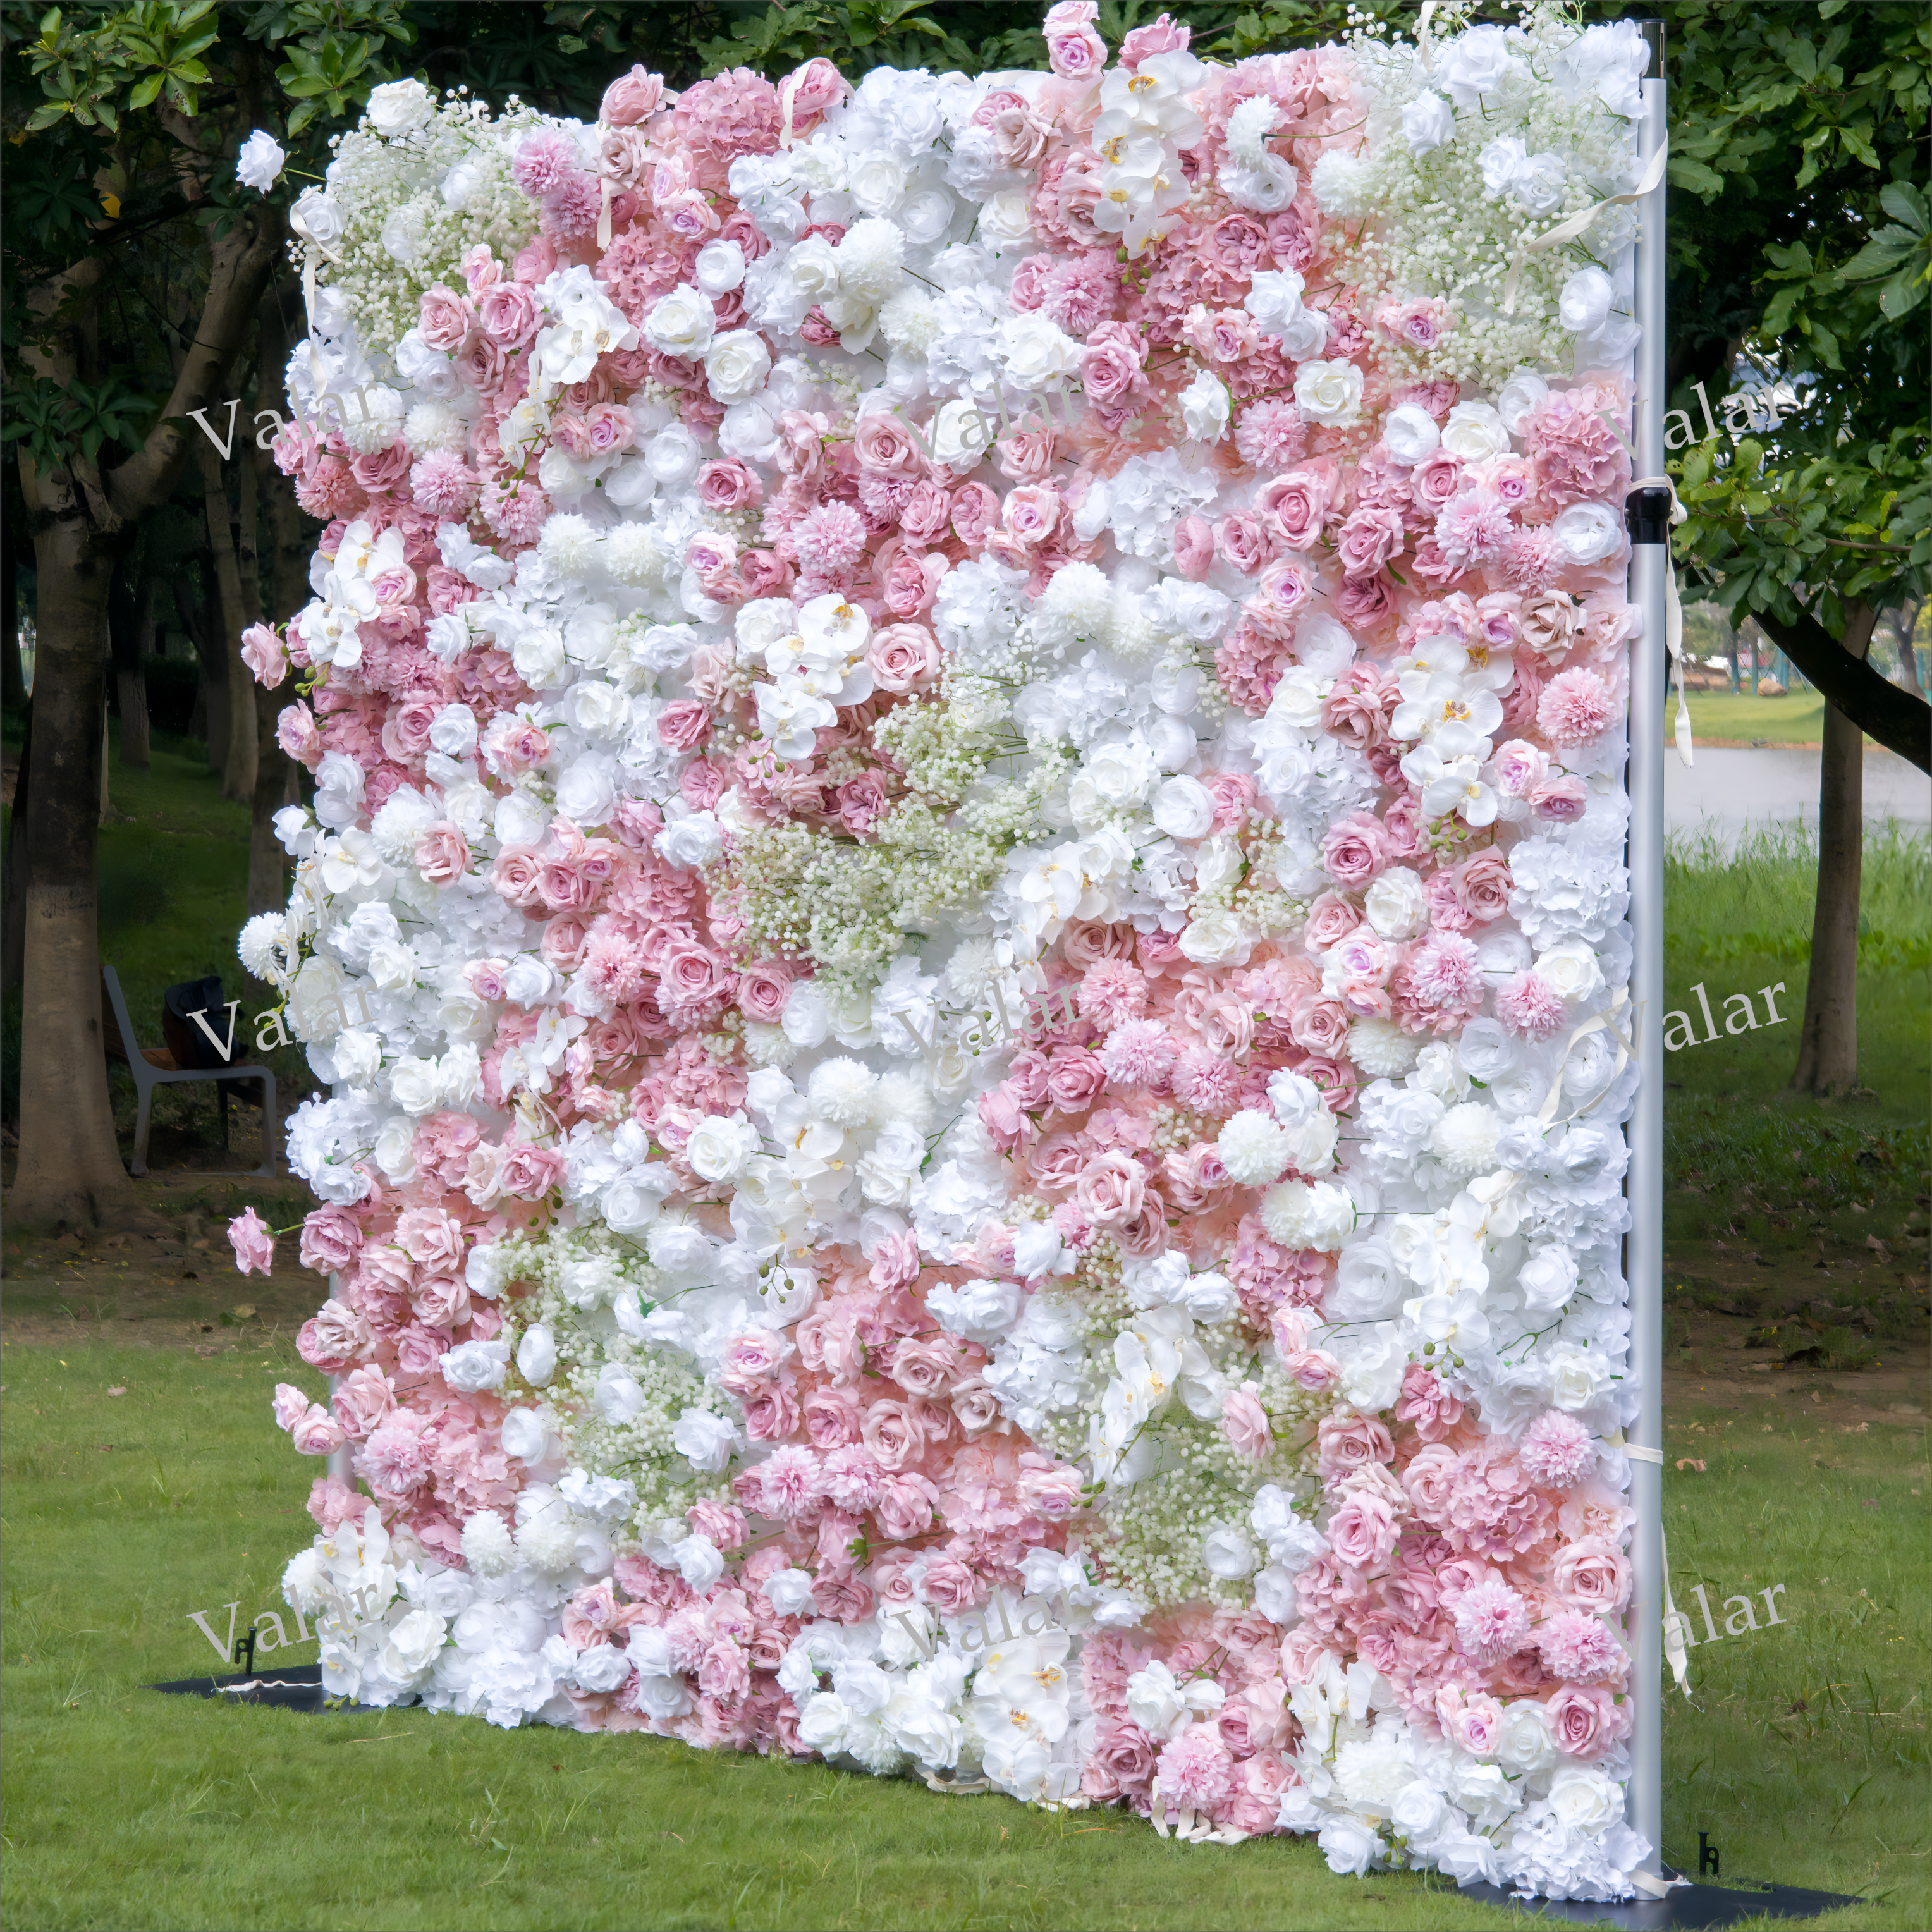 5D Roll-Up Flower Wall Backdrop for Wedding & Party Celebration Decor